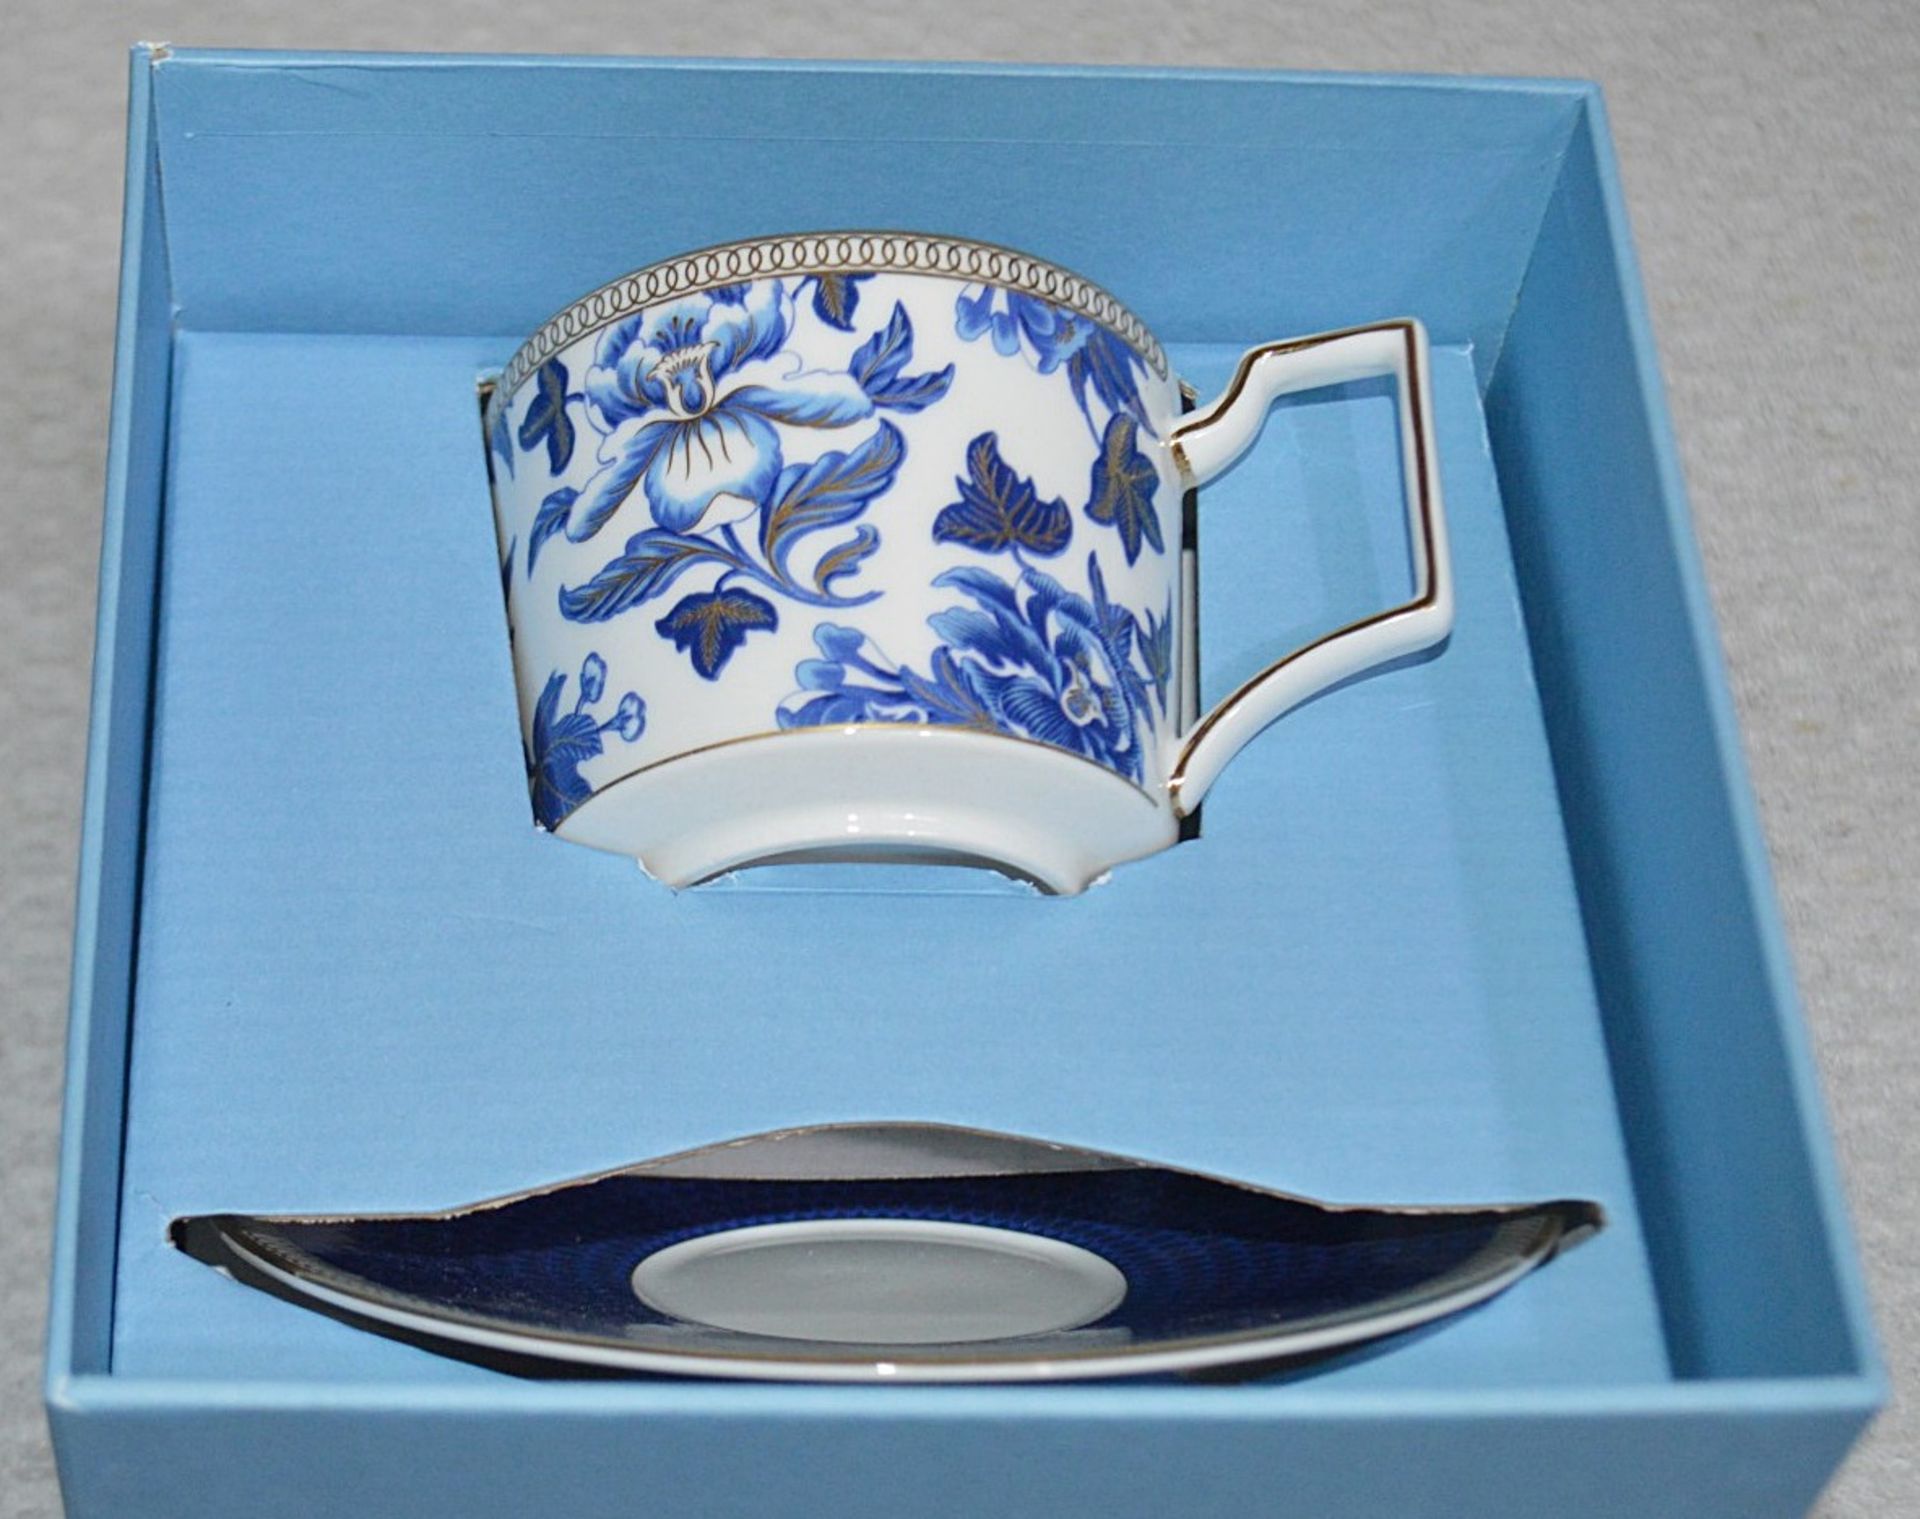 1 x WEDGWOOD 'Hibiscus' Bone China Teacup and Saucer - Original RRP £75.00 - Unused Boxed Stock - - Image 3 of 10